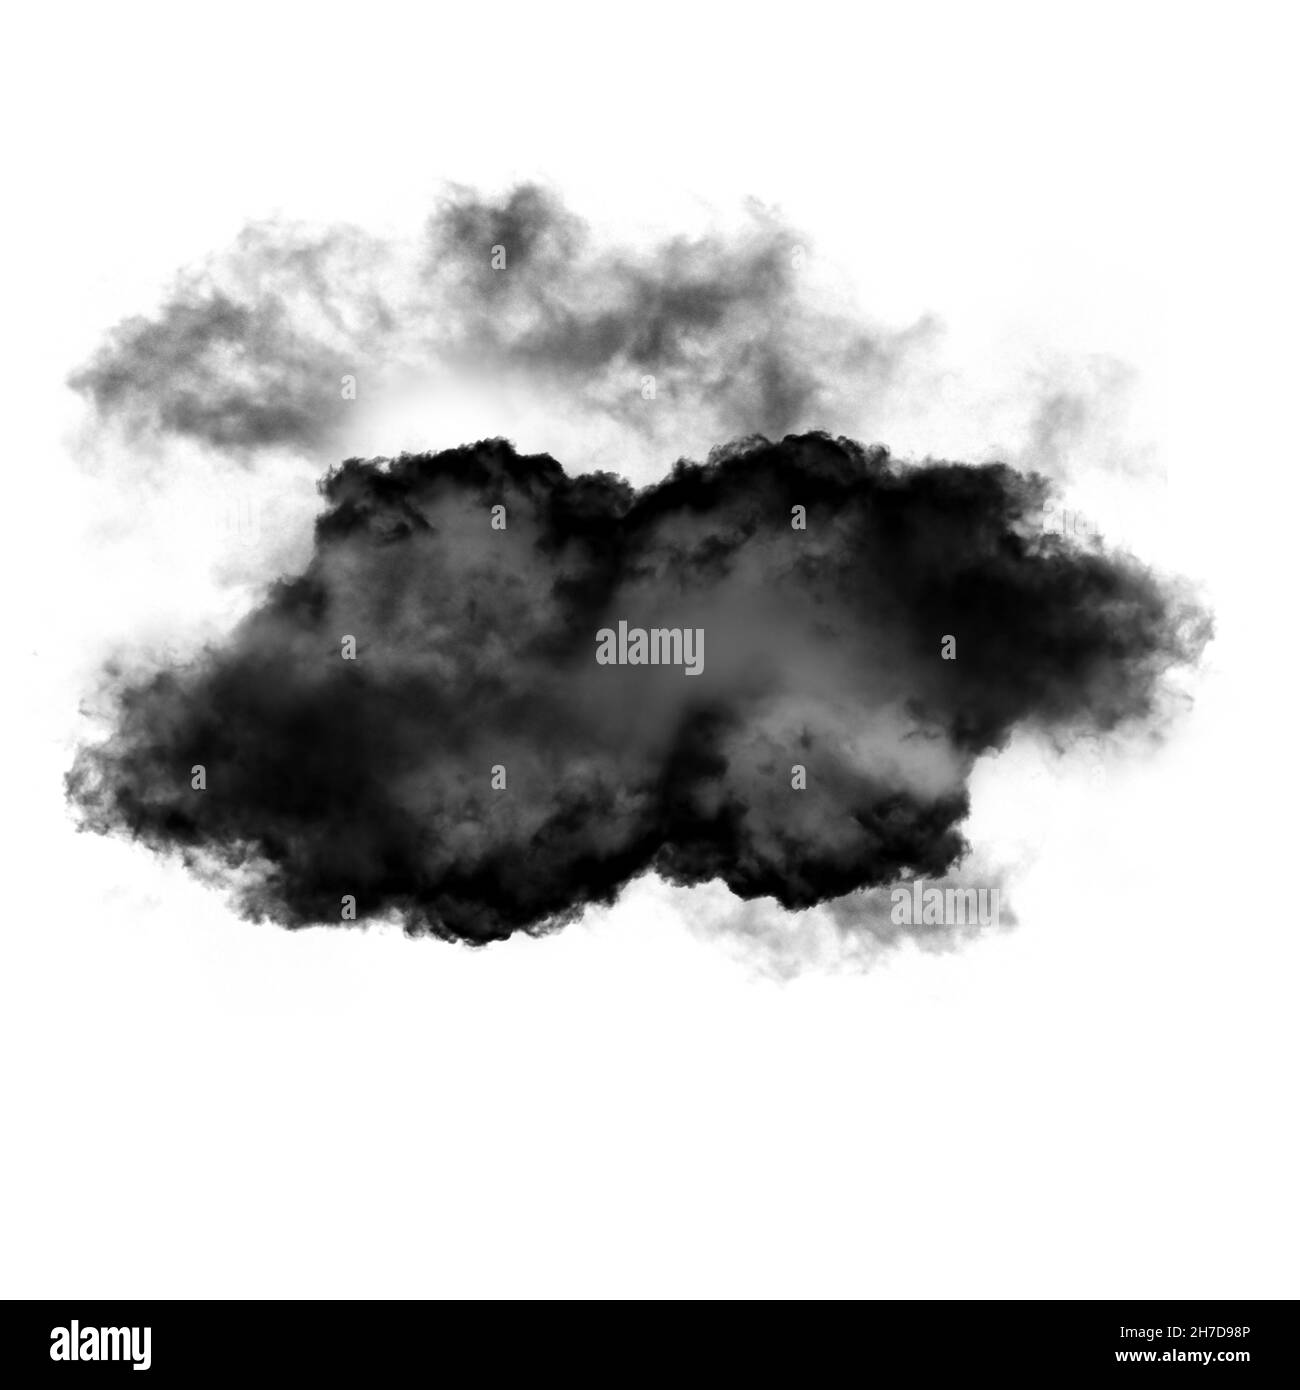 White cloud isolated over black background illustration, 3D rendering, single cloud natural object Stock Photo